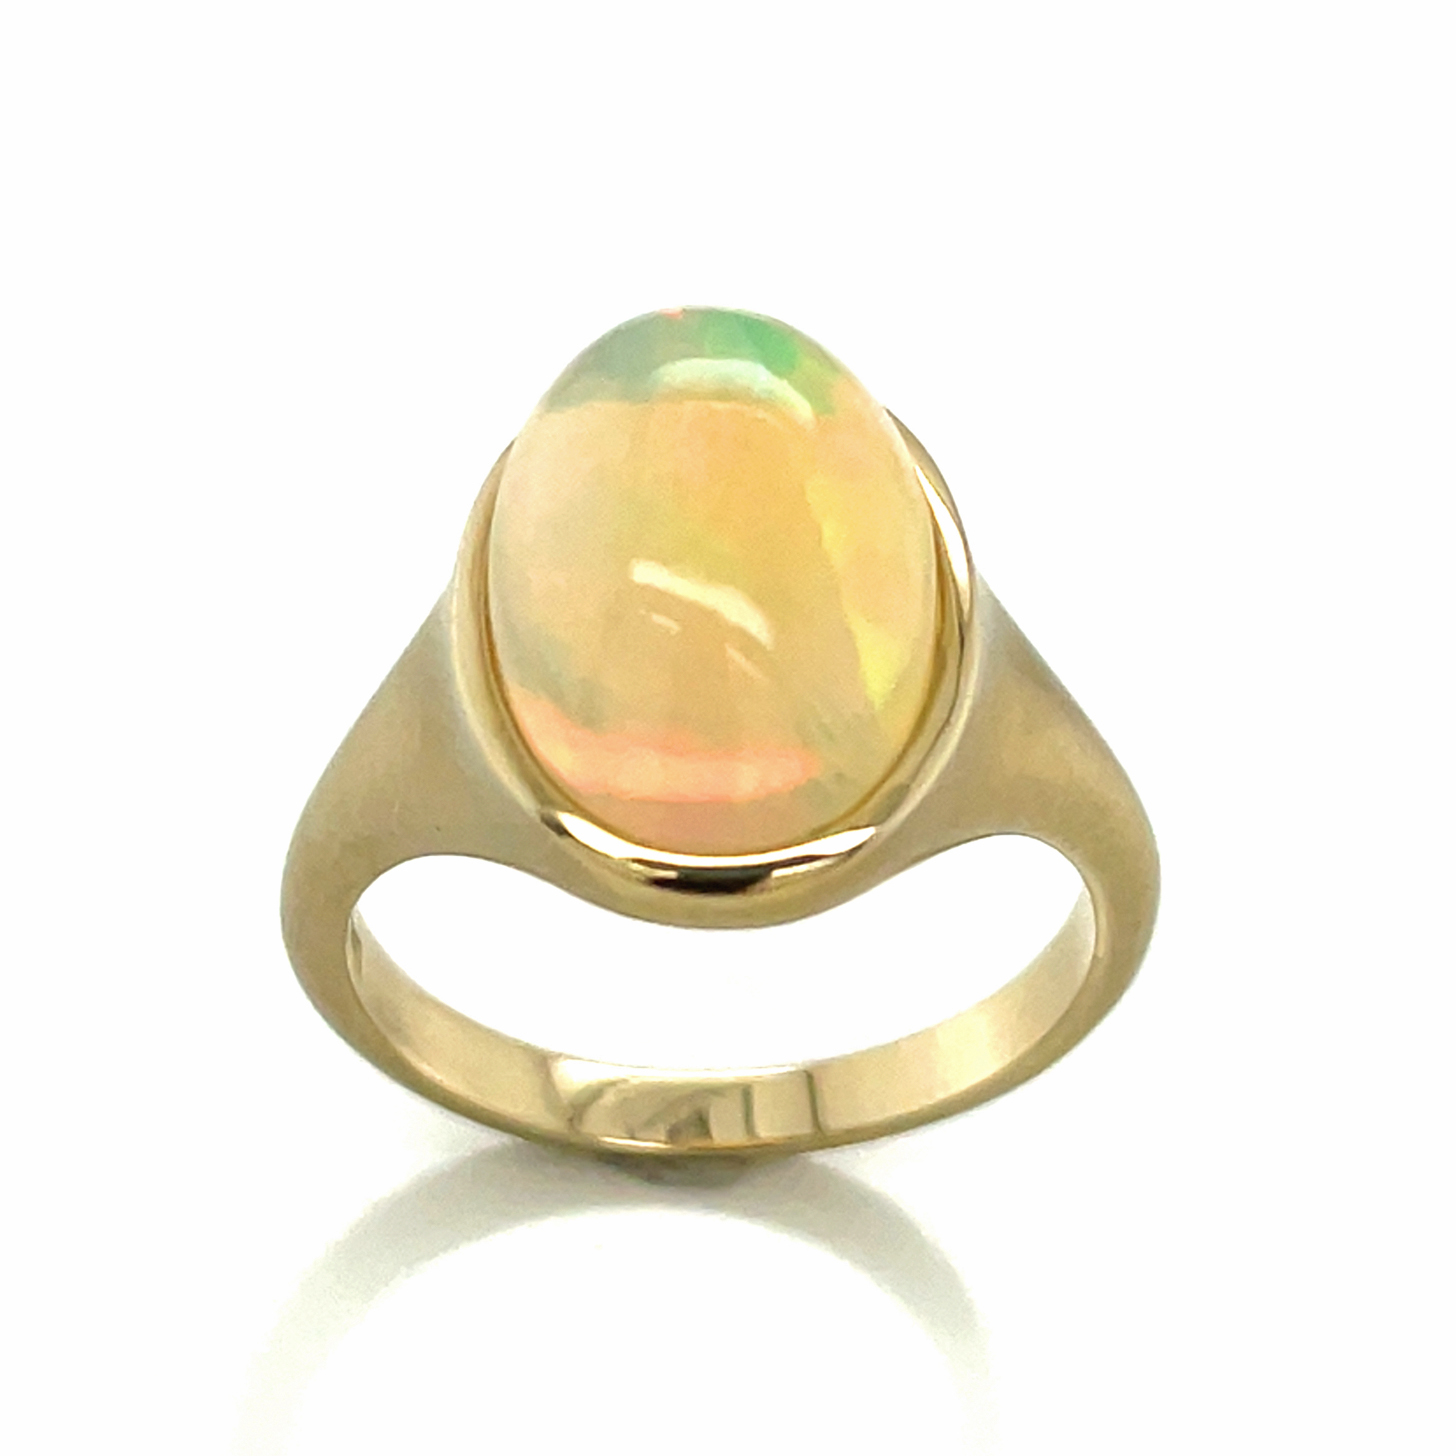 Kristallopal, gold-opalisierend, oval Cabochon, ca. 3,40 ct. Edelstein Ring Gelbgold 375/000 Sogni d´oro Terra Opalis